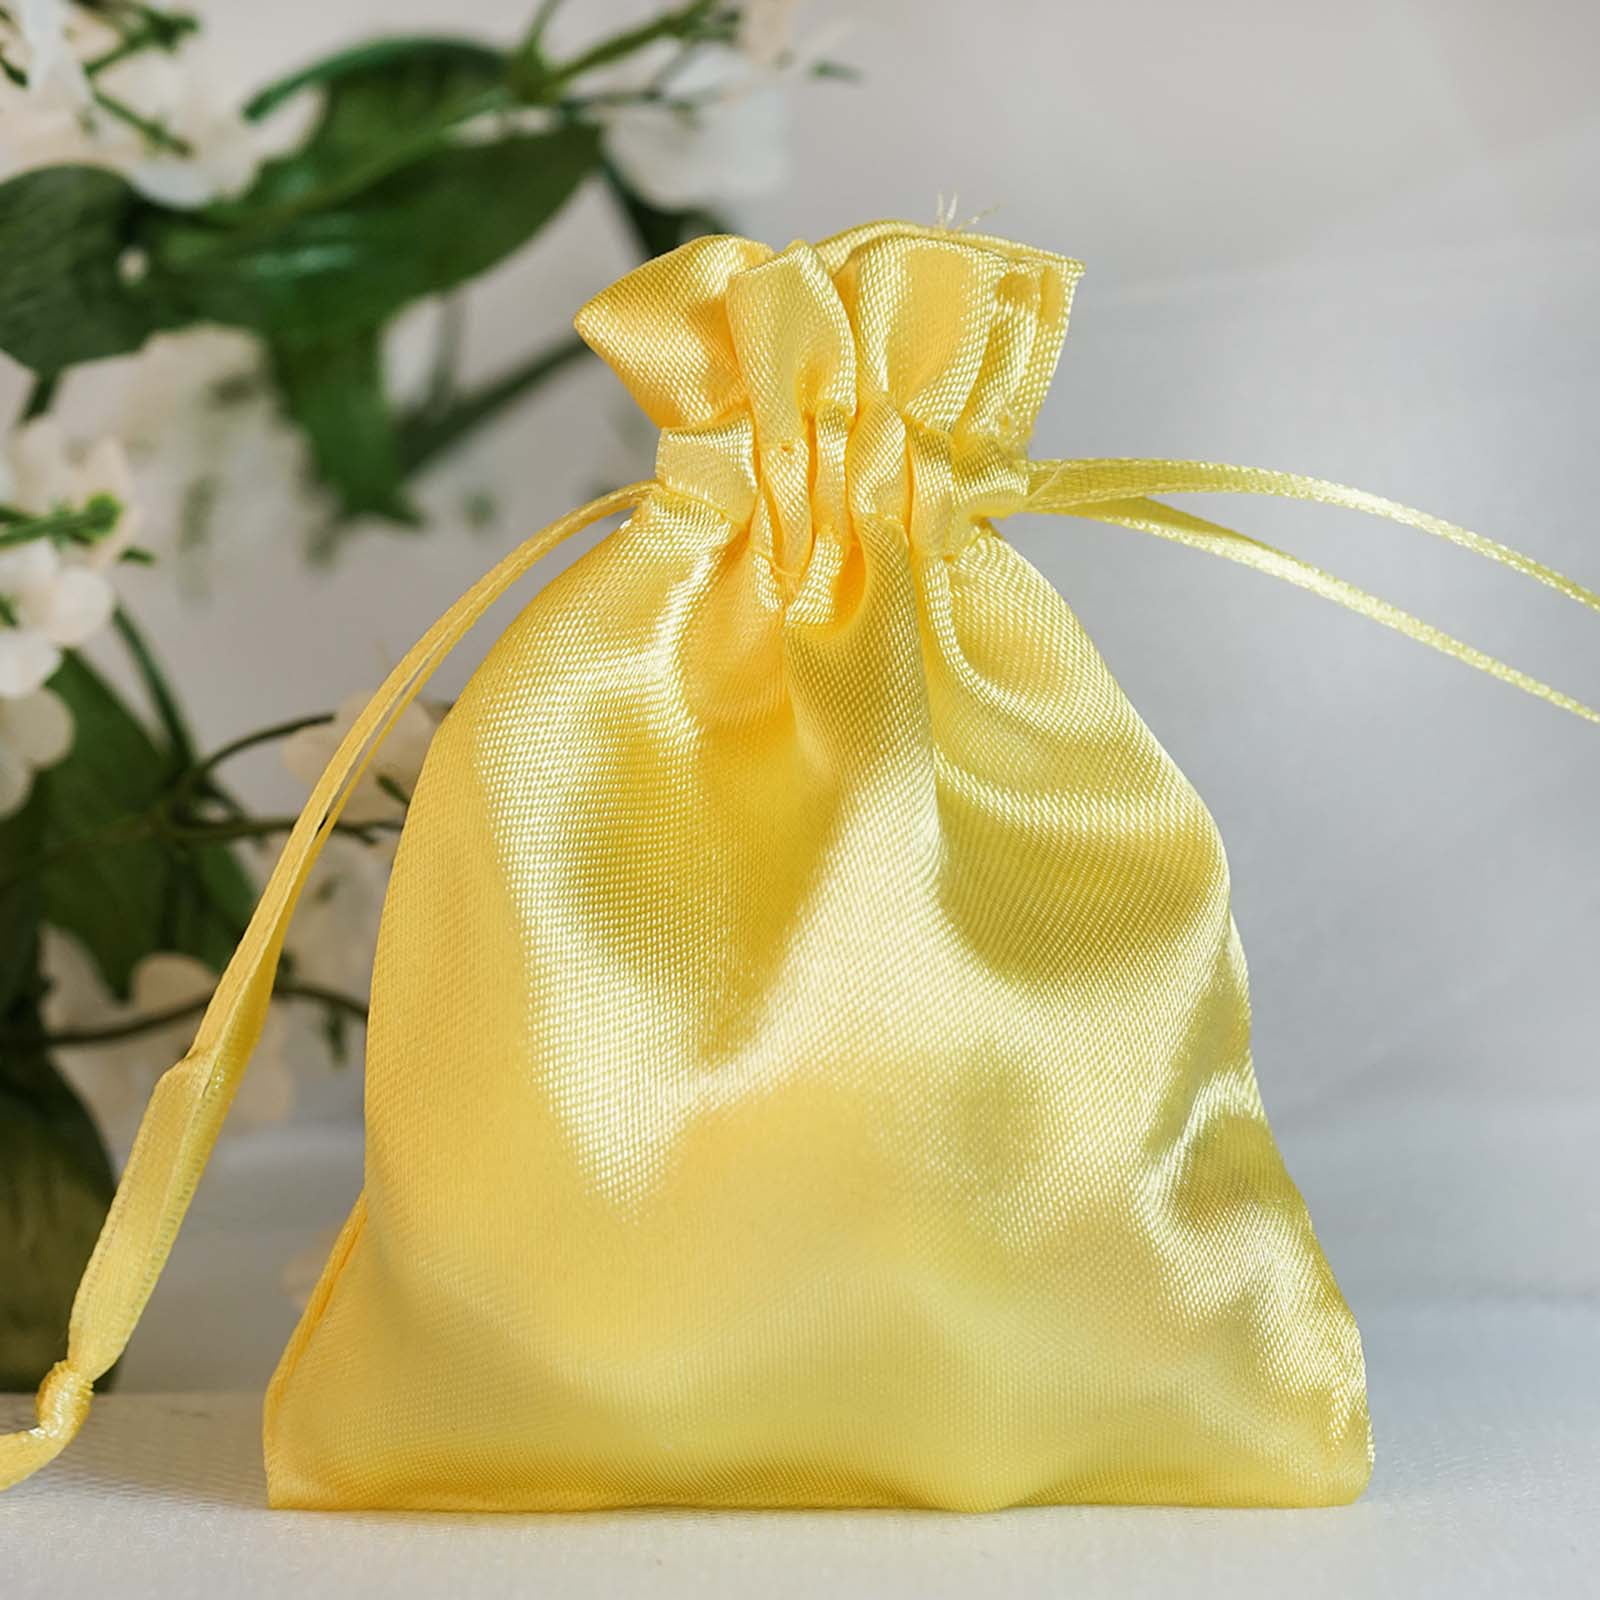 35 4x6 Golden yellow Organza bags 35 4x6 inches Star Print Organza pouches for Candy jewelry party wedding favor present bag